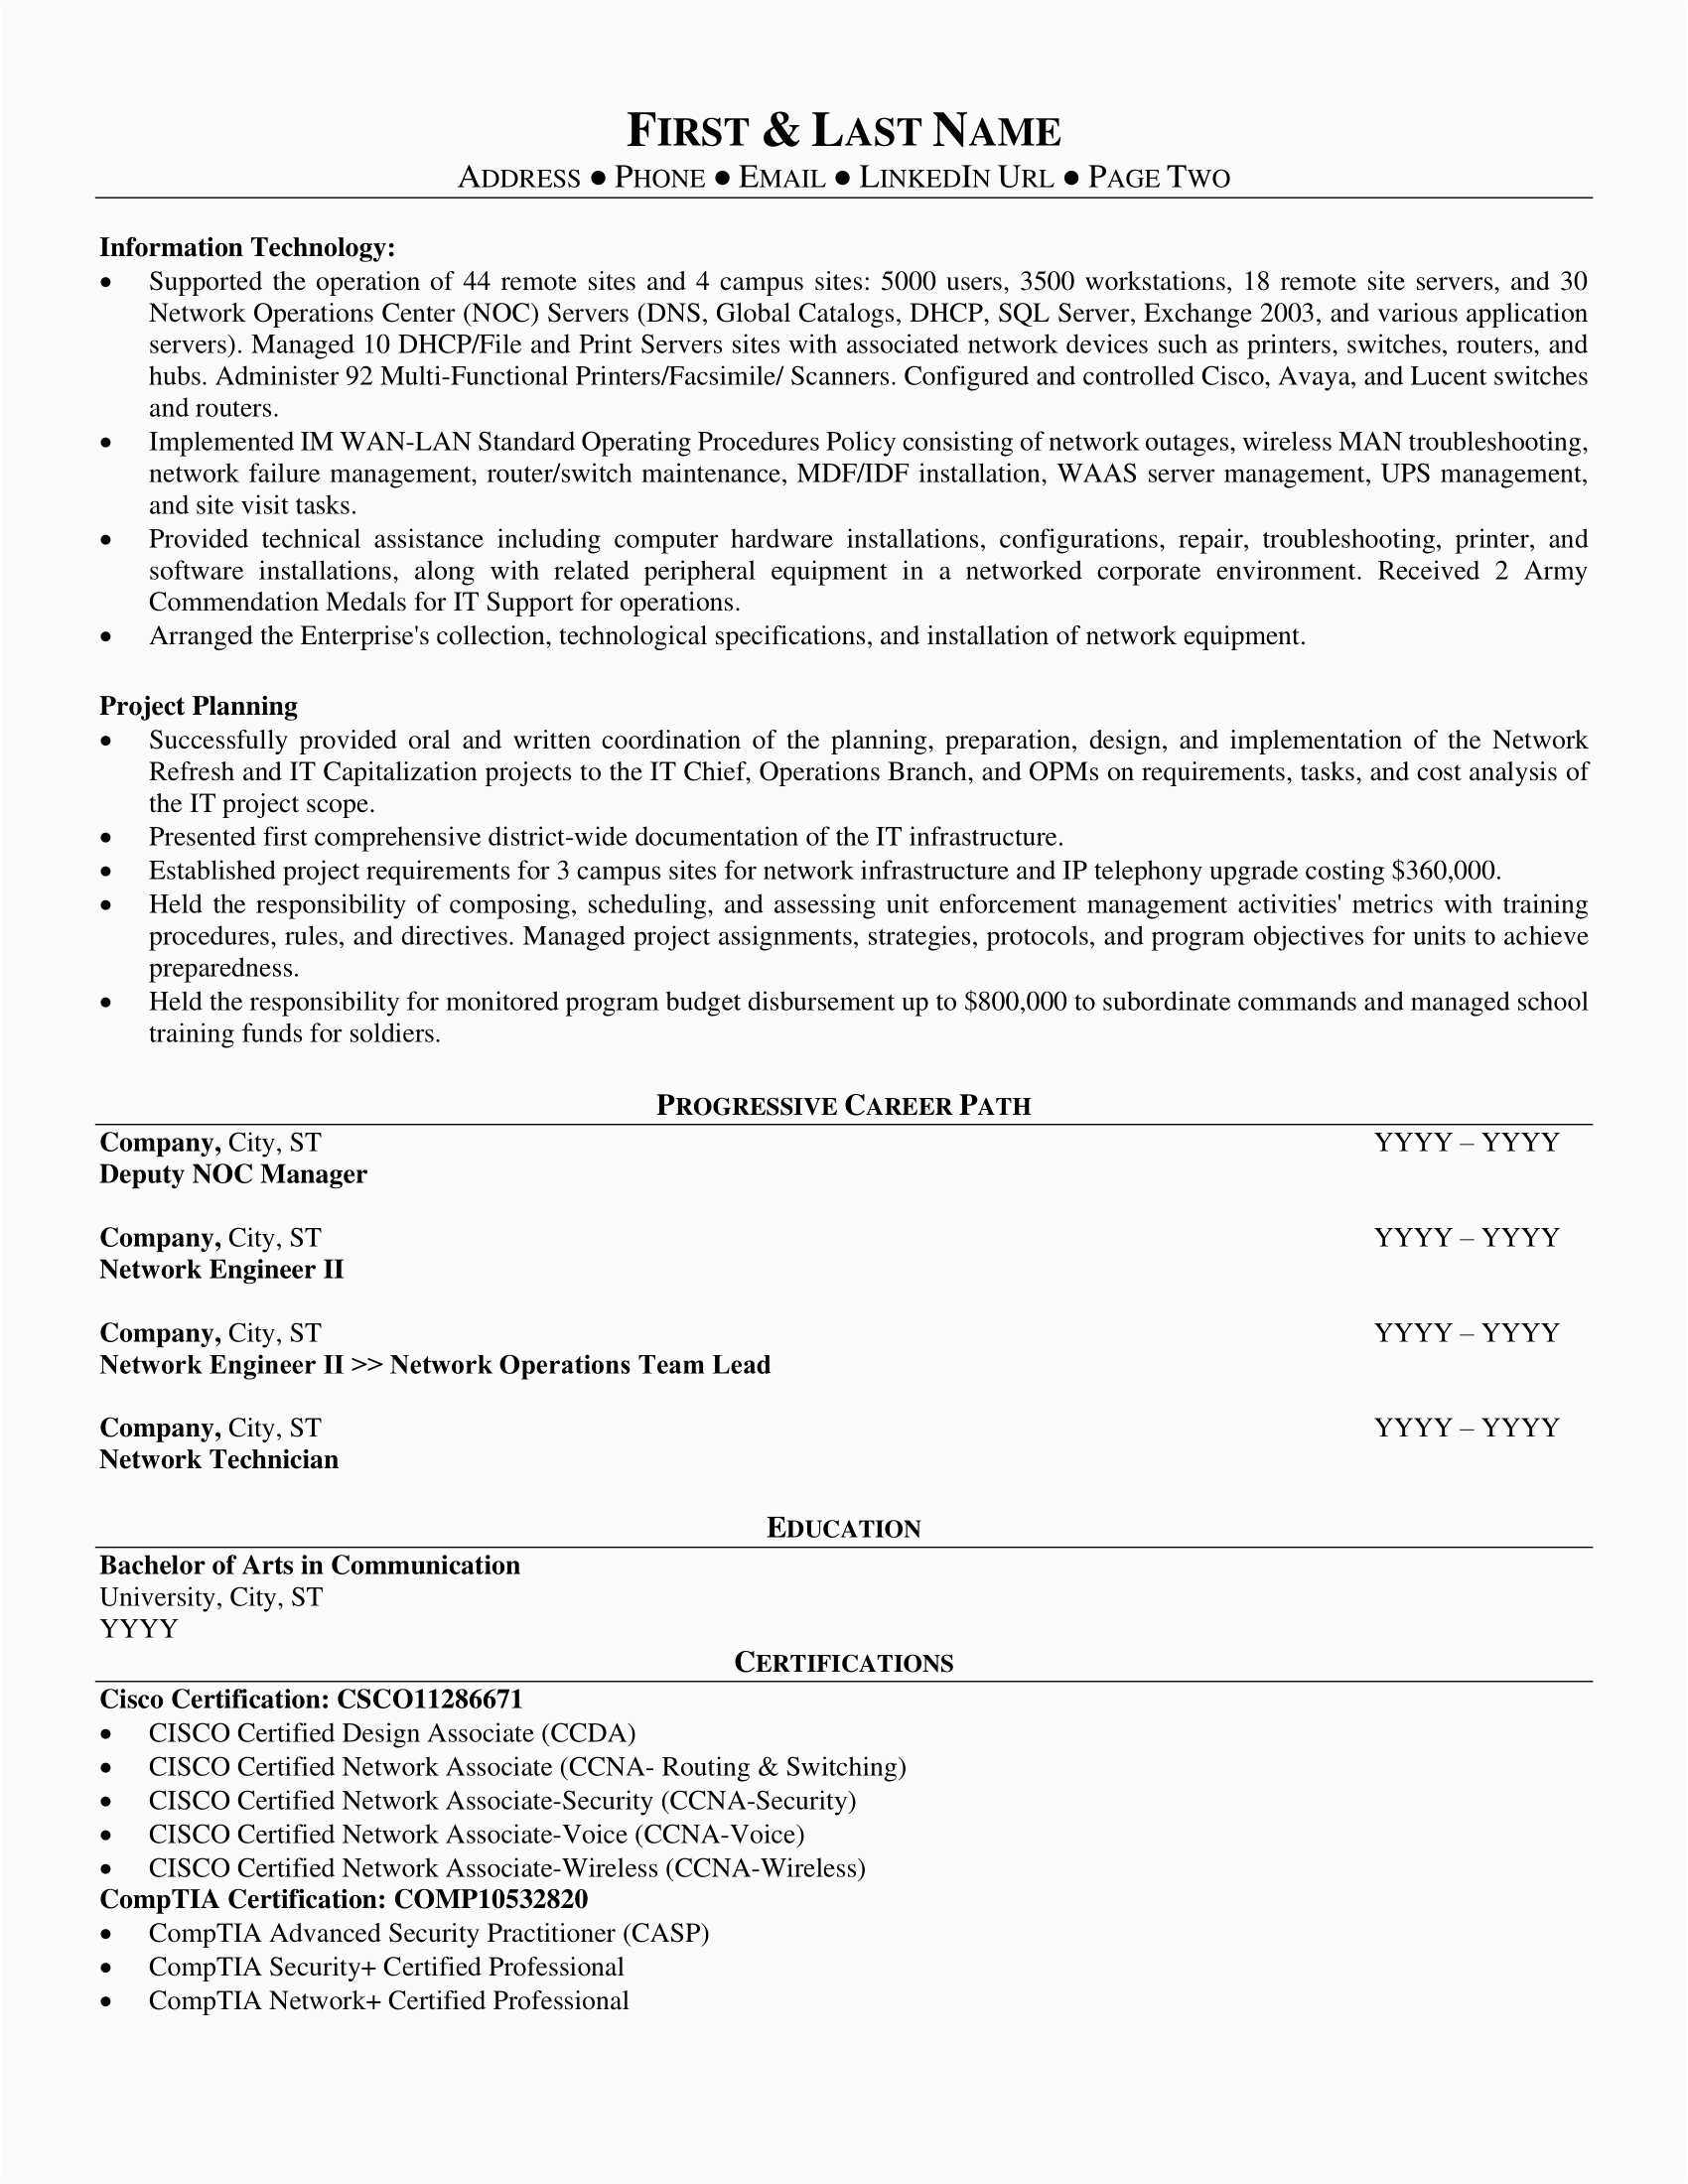 Sample Civilian Resume with Military Experience Military to Civilian Resume Sample